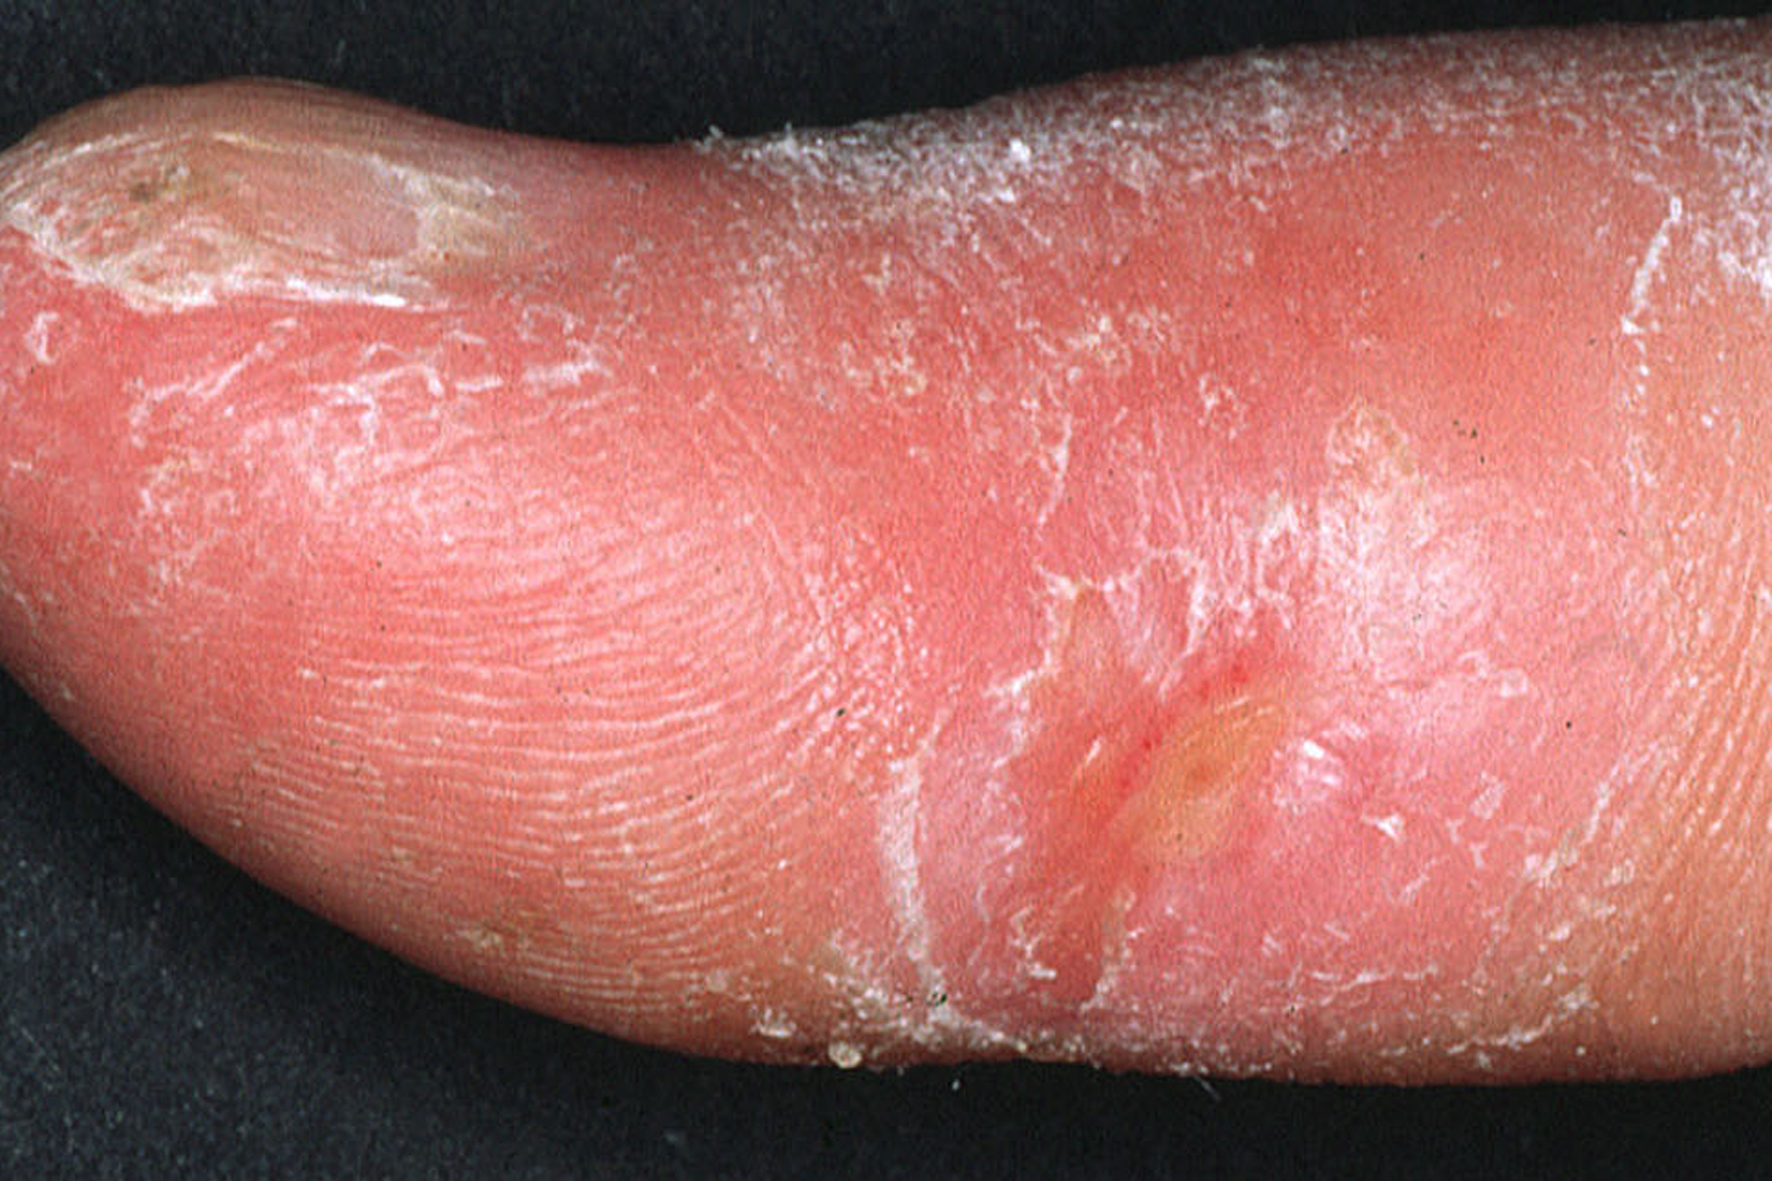 Clinical appearance of acrosclerotic piece-meal necrosis of the thumb in a patient with systemic sclerosis.